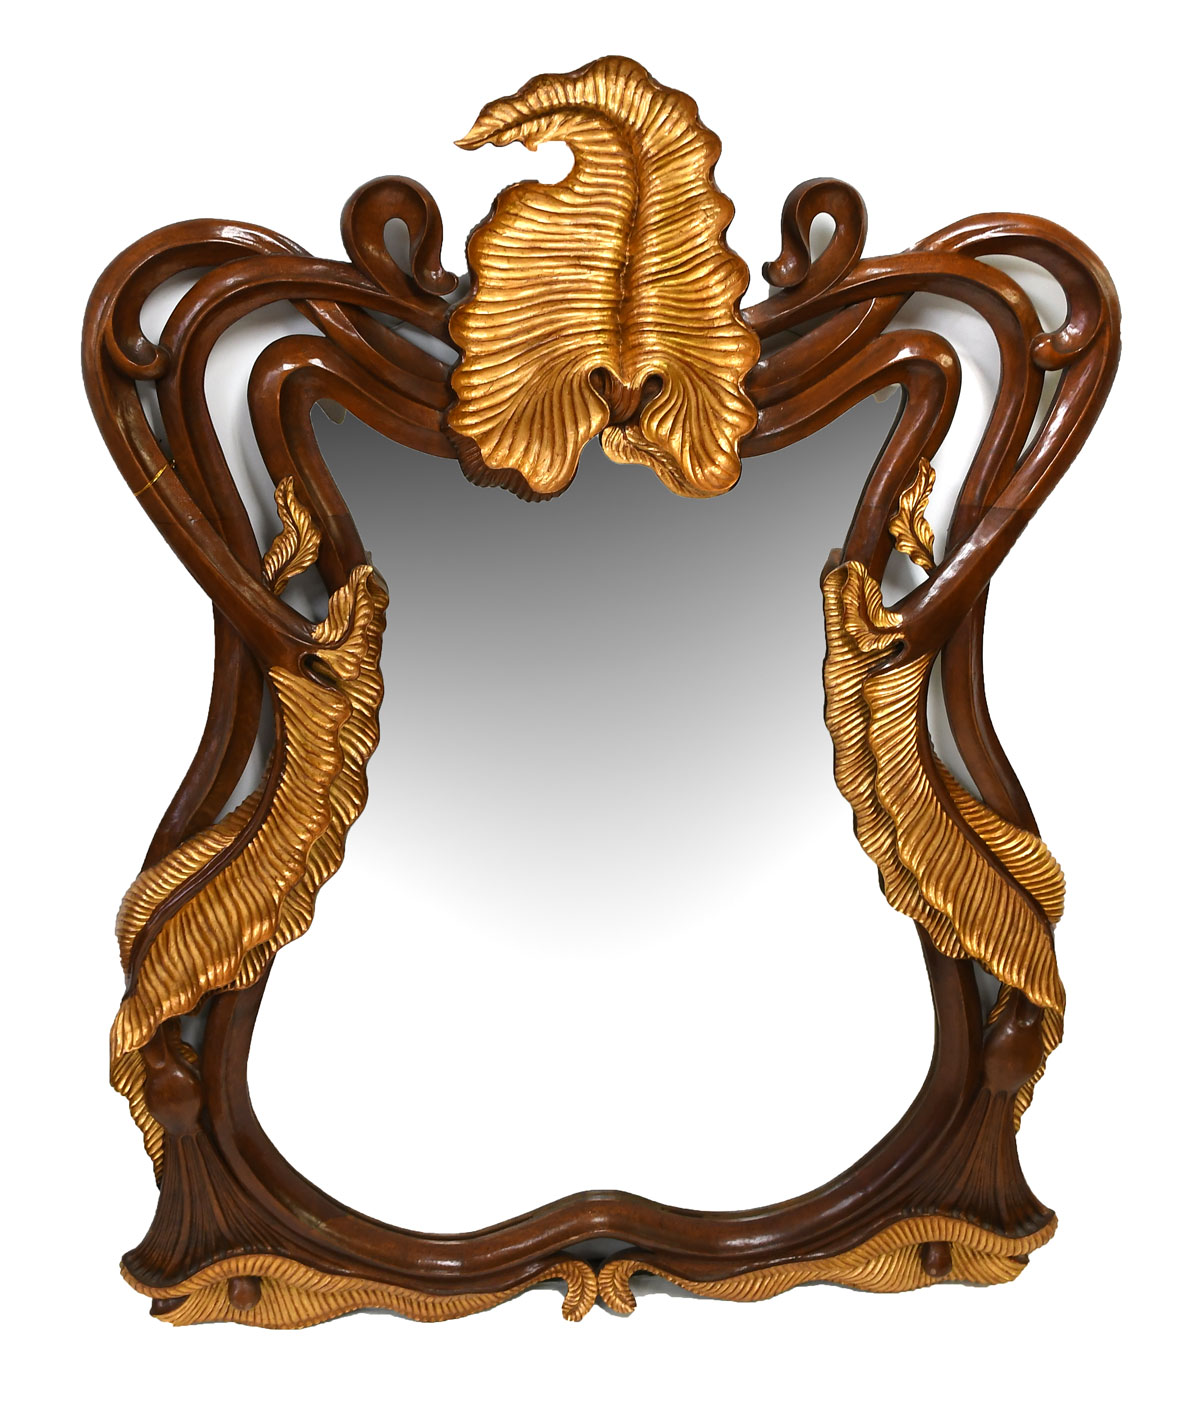 LARGE CARVED GILT ALOCASIA MIRROR: